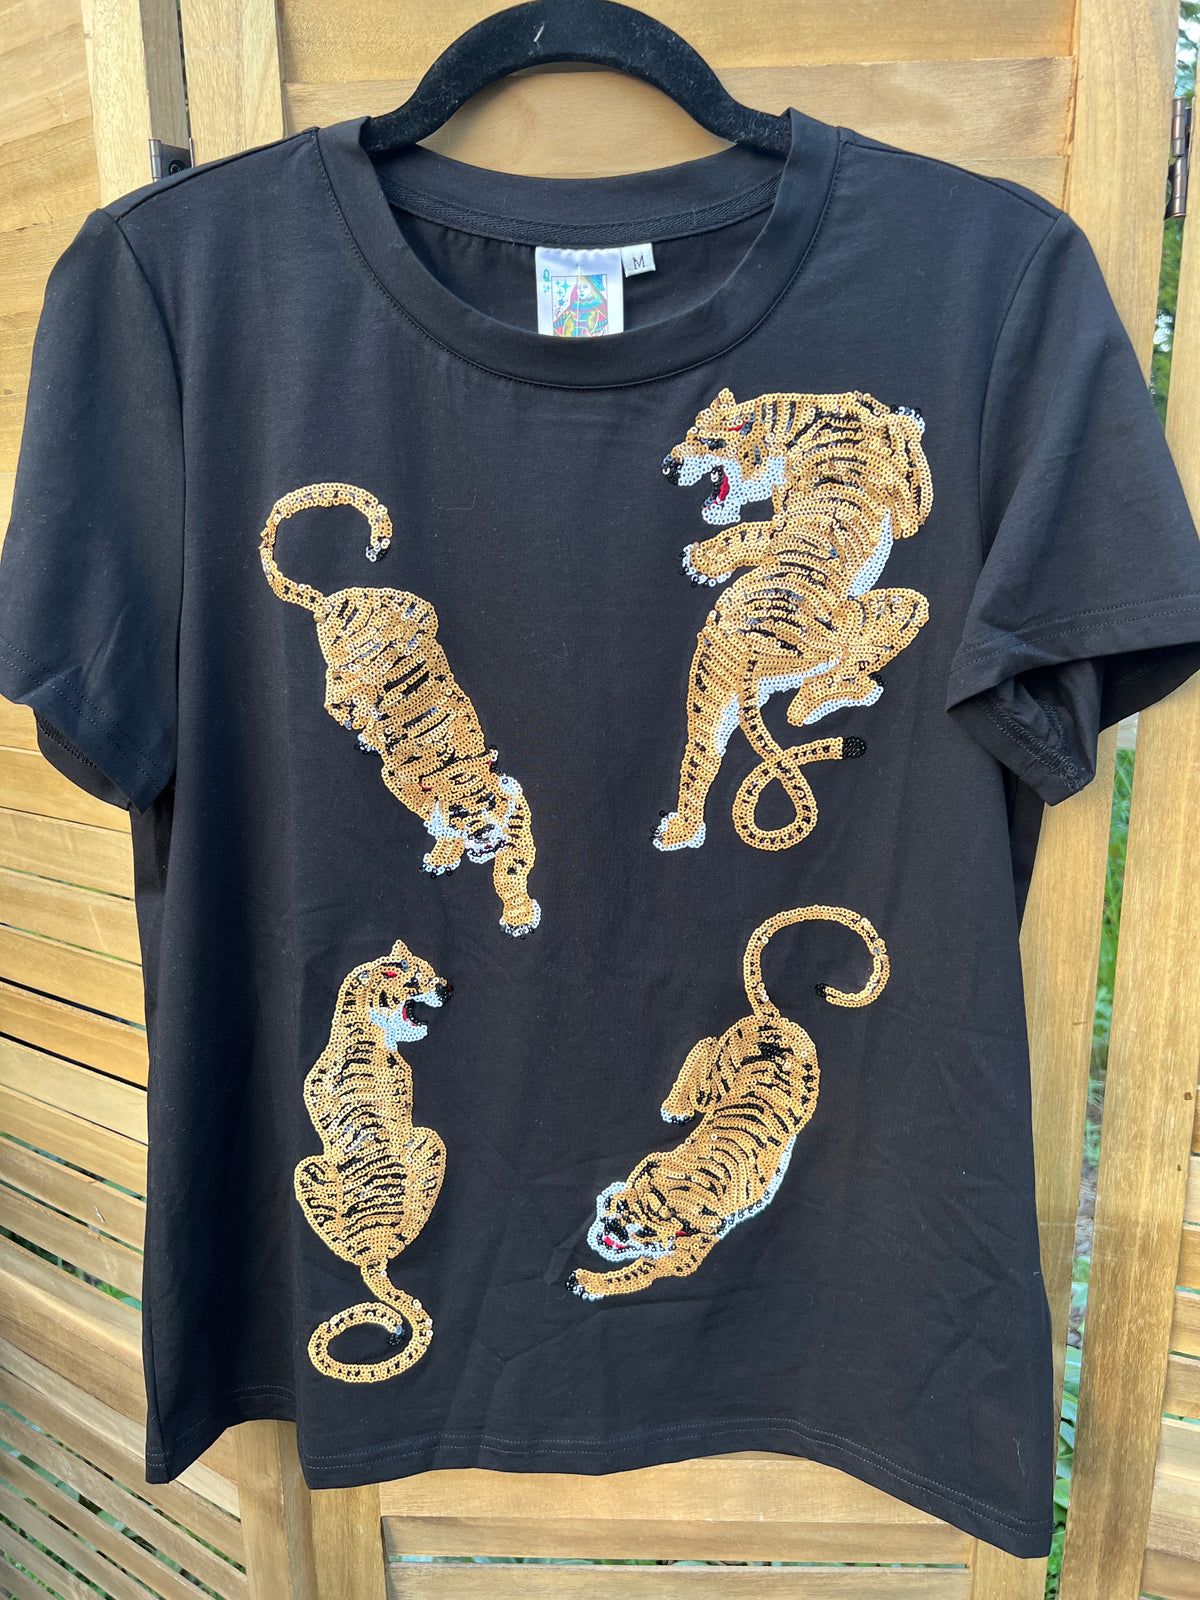 4 Crawling Tigers Tee in Black--Lemons and Limes Boutique